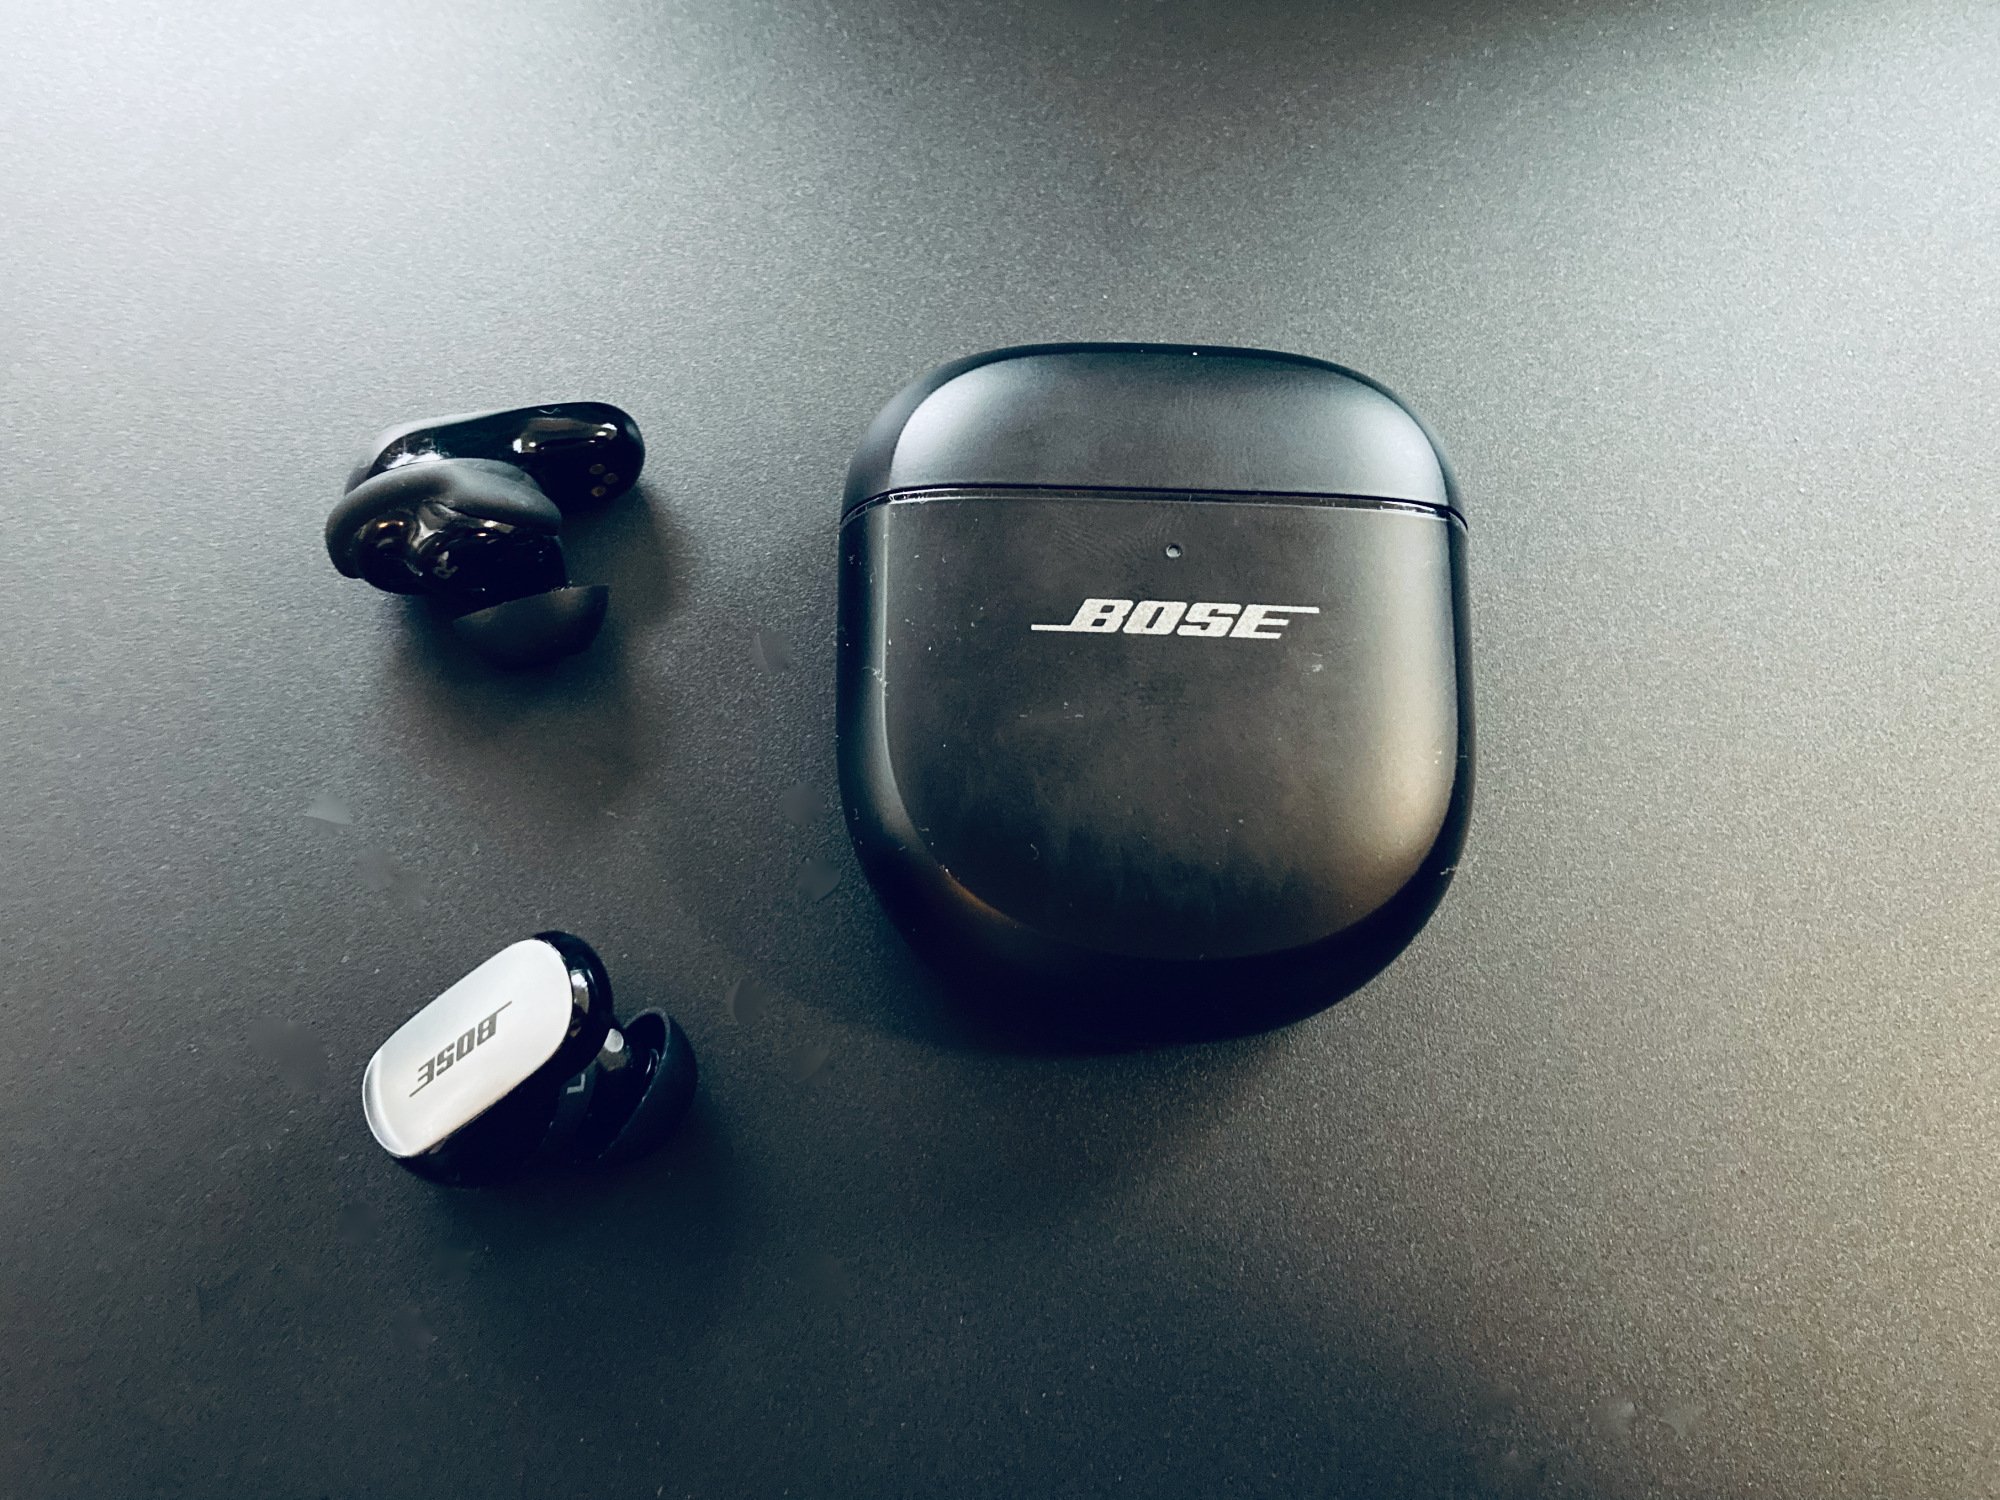 Bose quiet comfort ultra earbuds with charging case